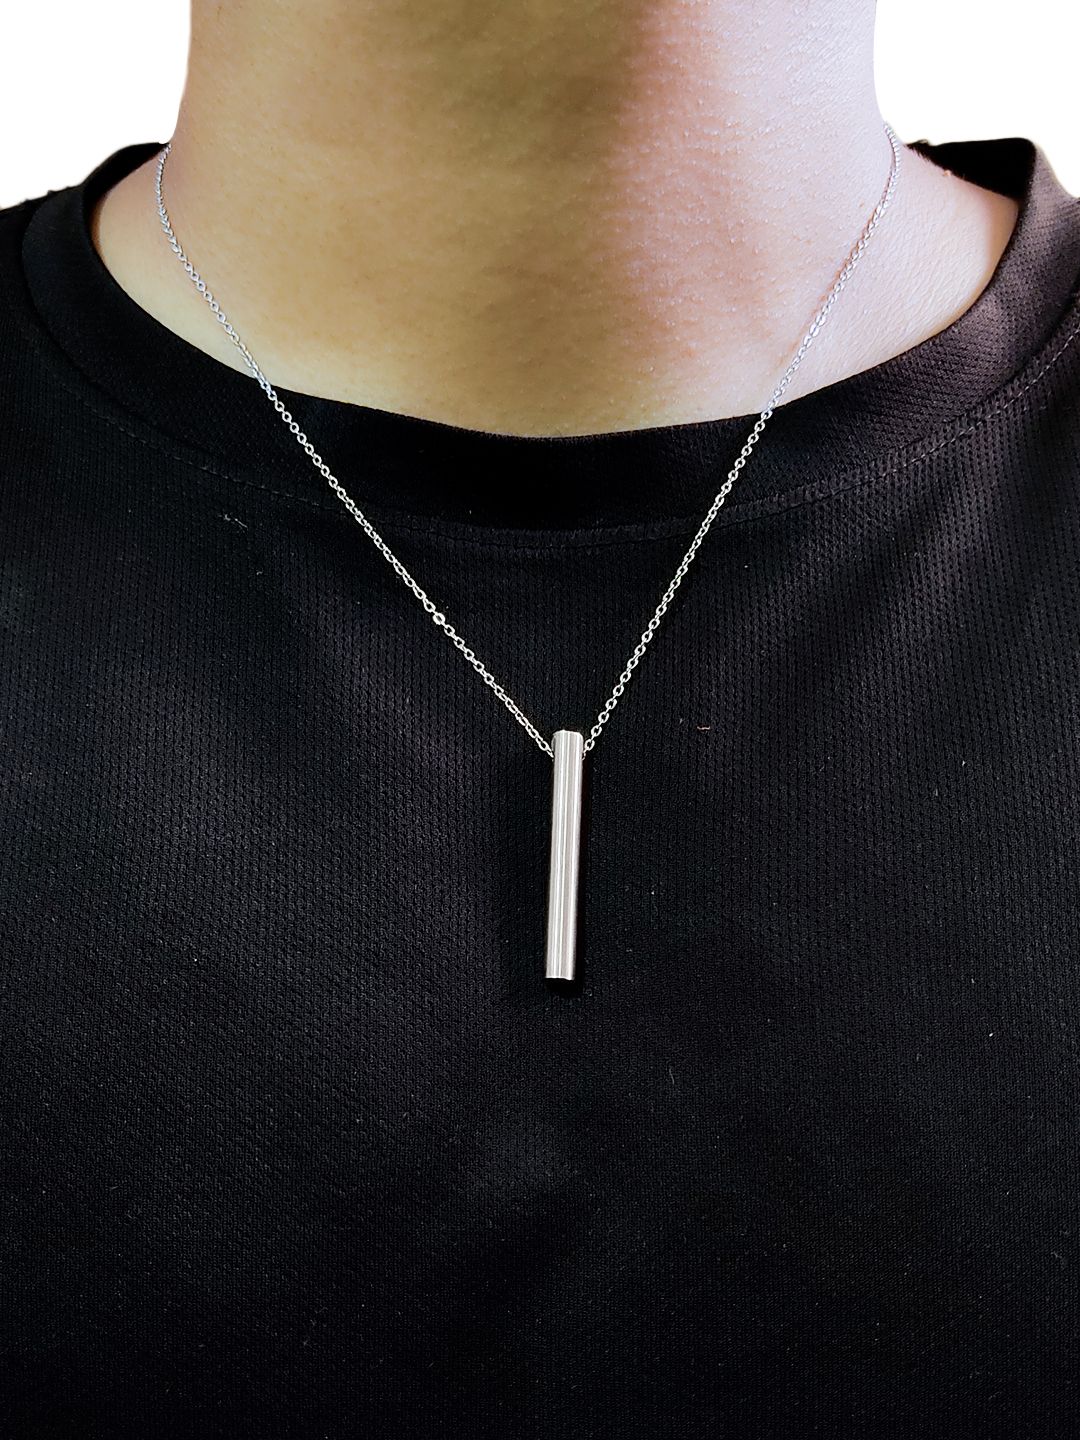 Silver Stainless Steel Round Bar Pendant adjustable Necklace chain